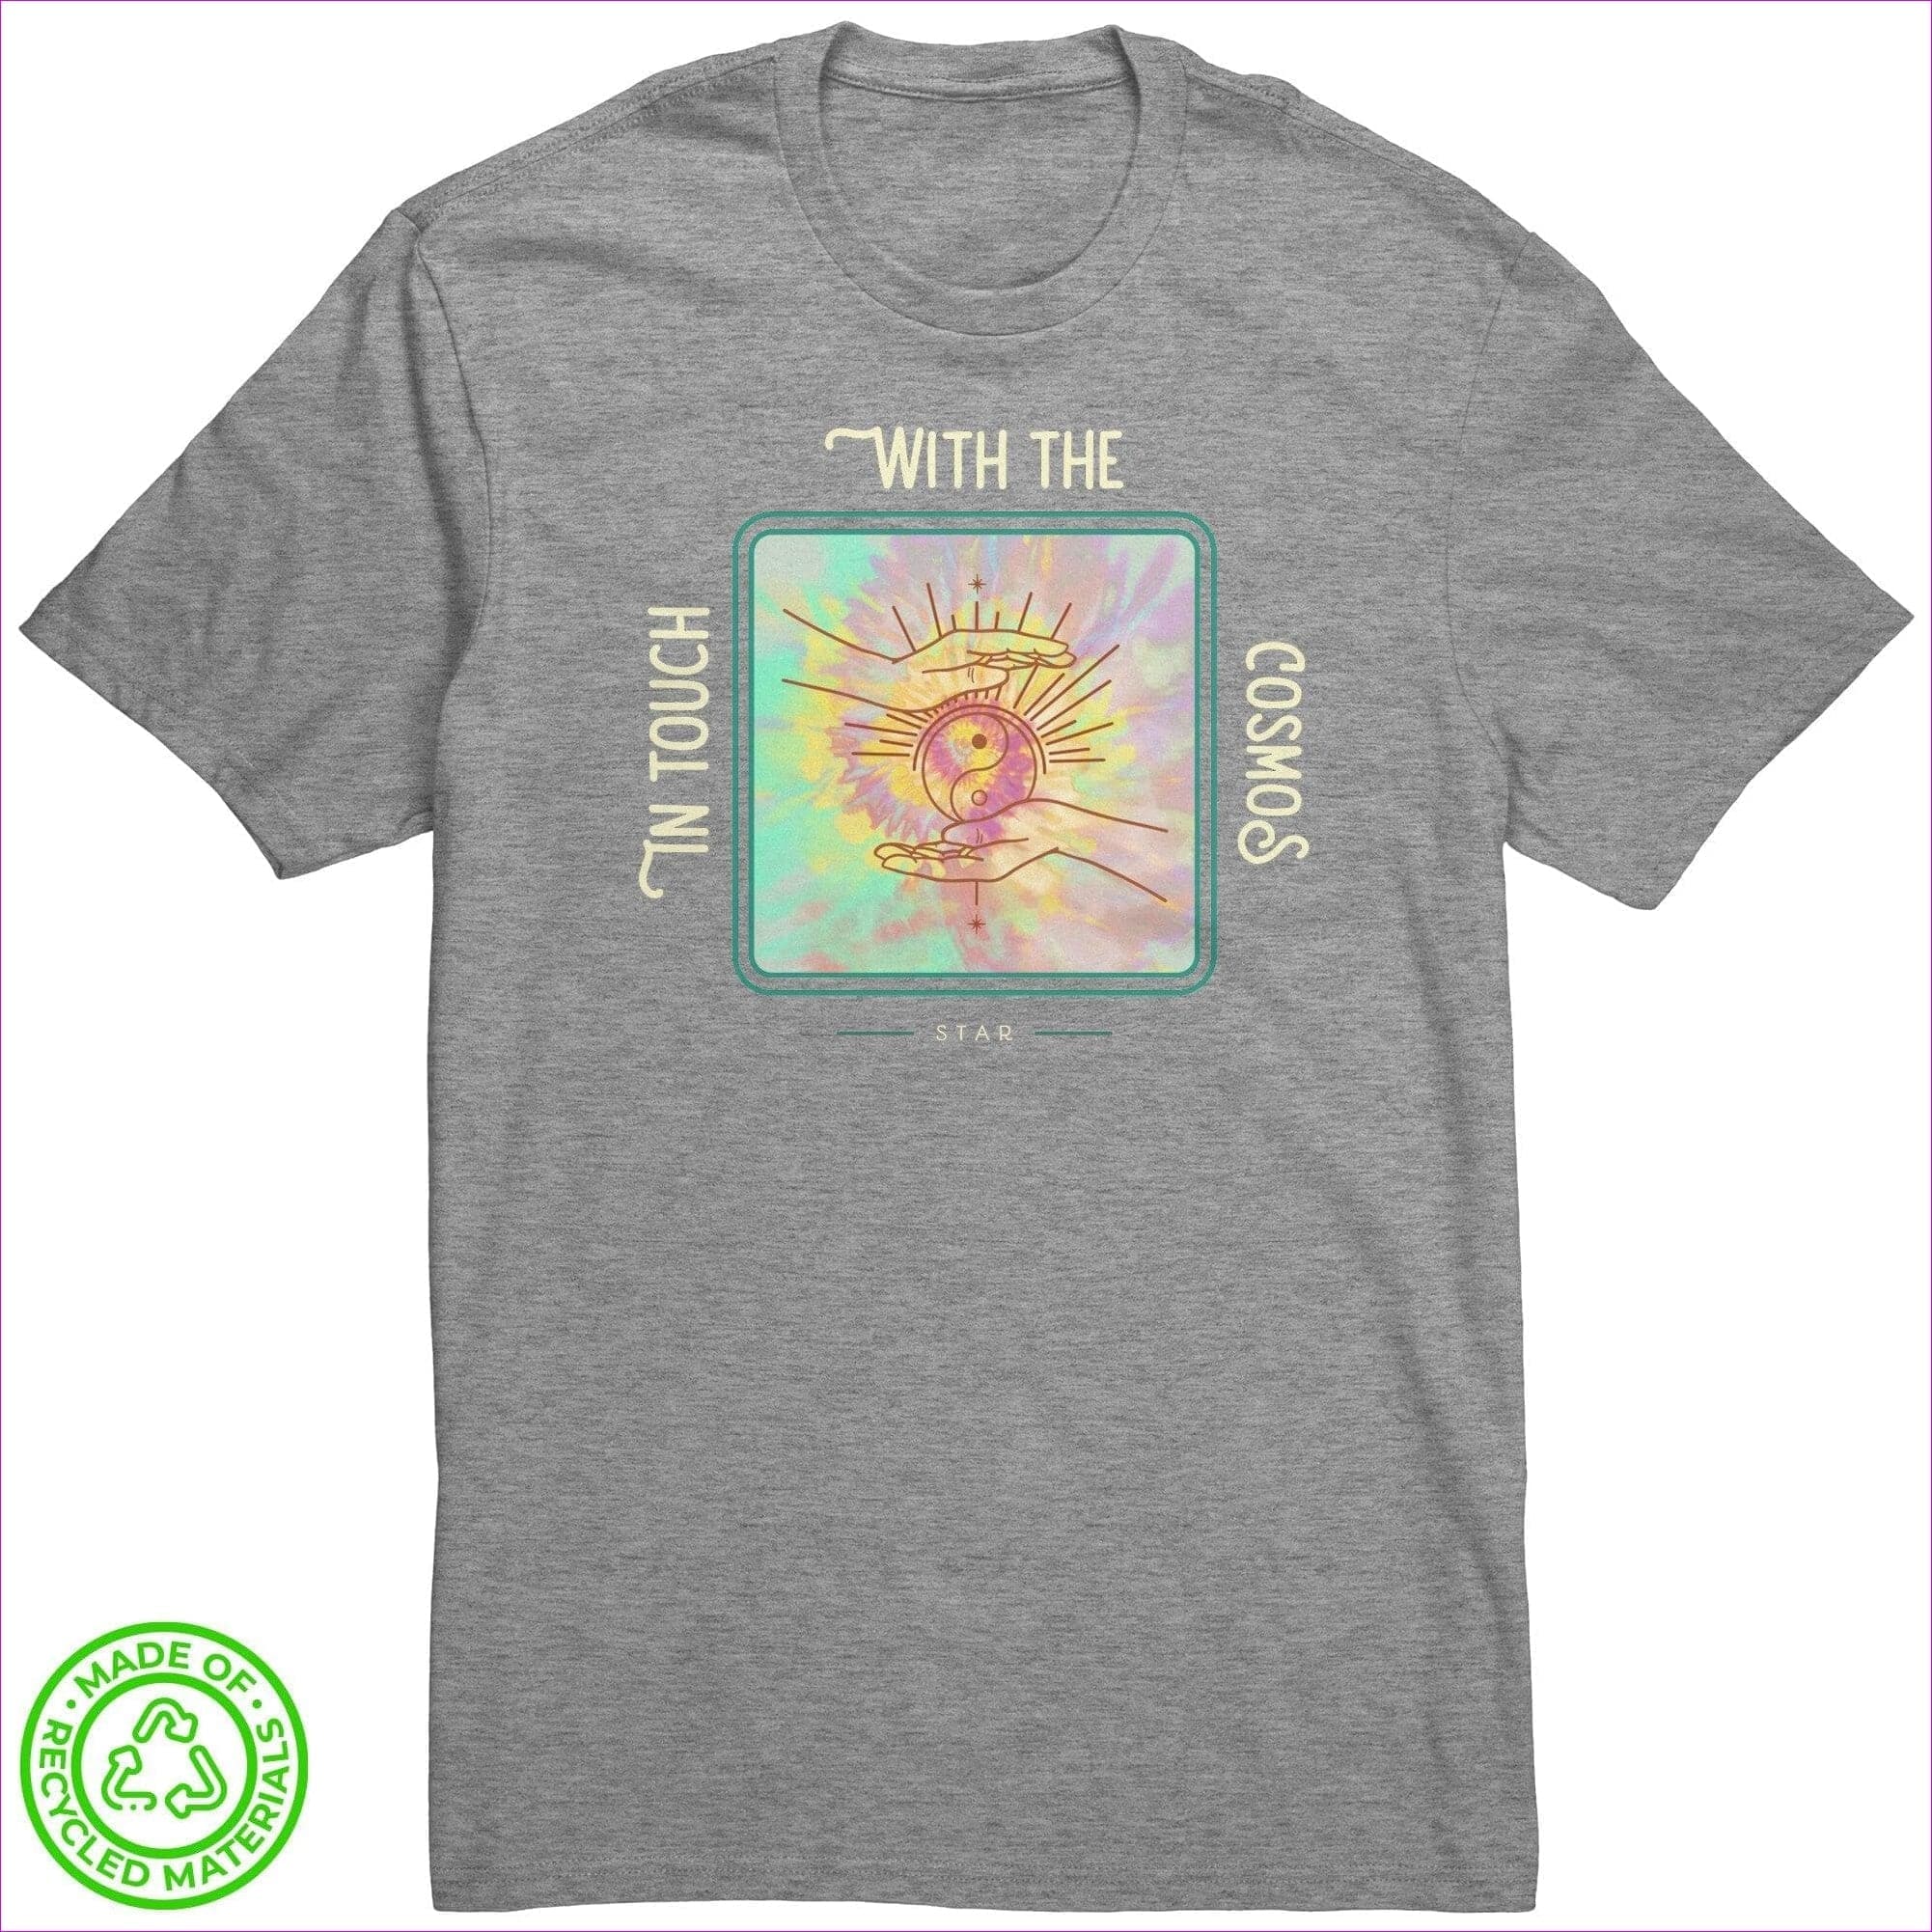 Light Heather Grey - In Touch Recycled Fabric Unisex Tee - Unisex T-Shirt at TFC&H Co.